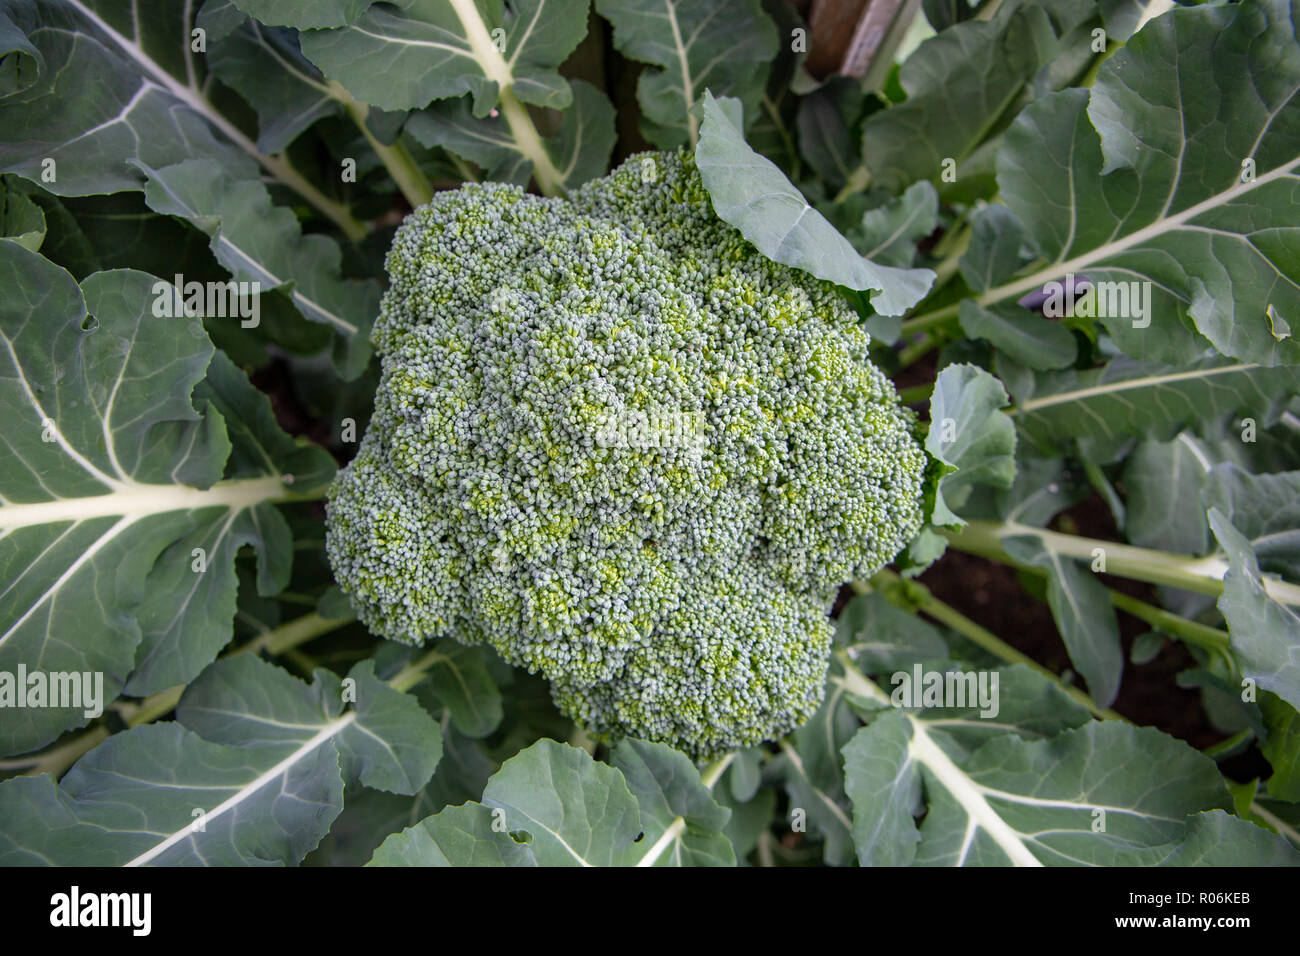 Fresh Organic Broccoli Growing In A Home Garden And Ready To Pick